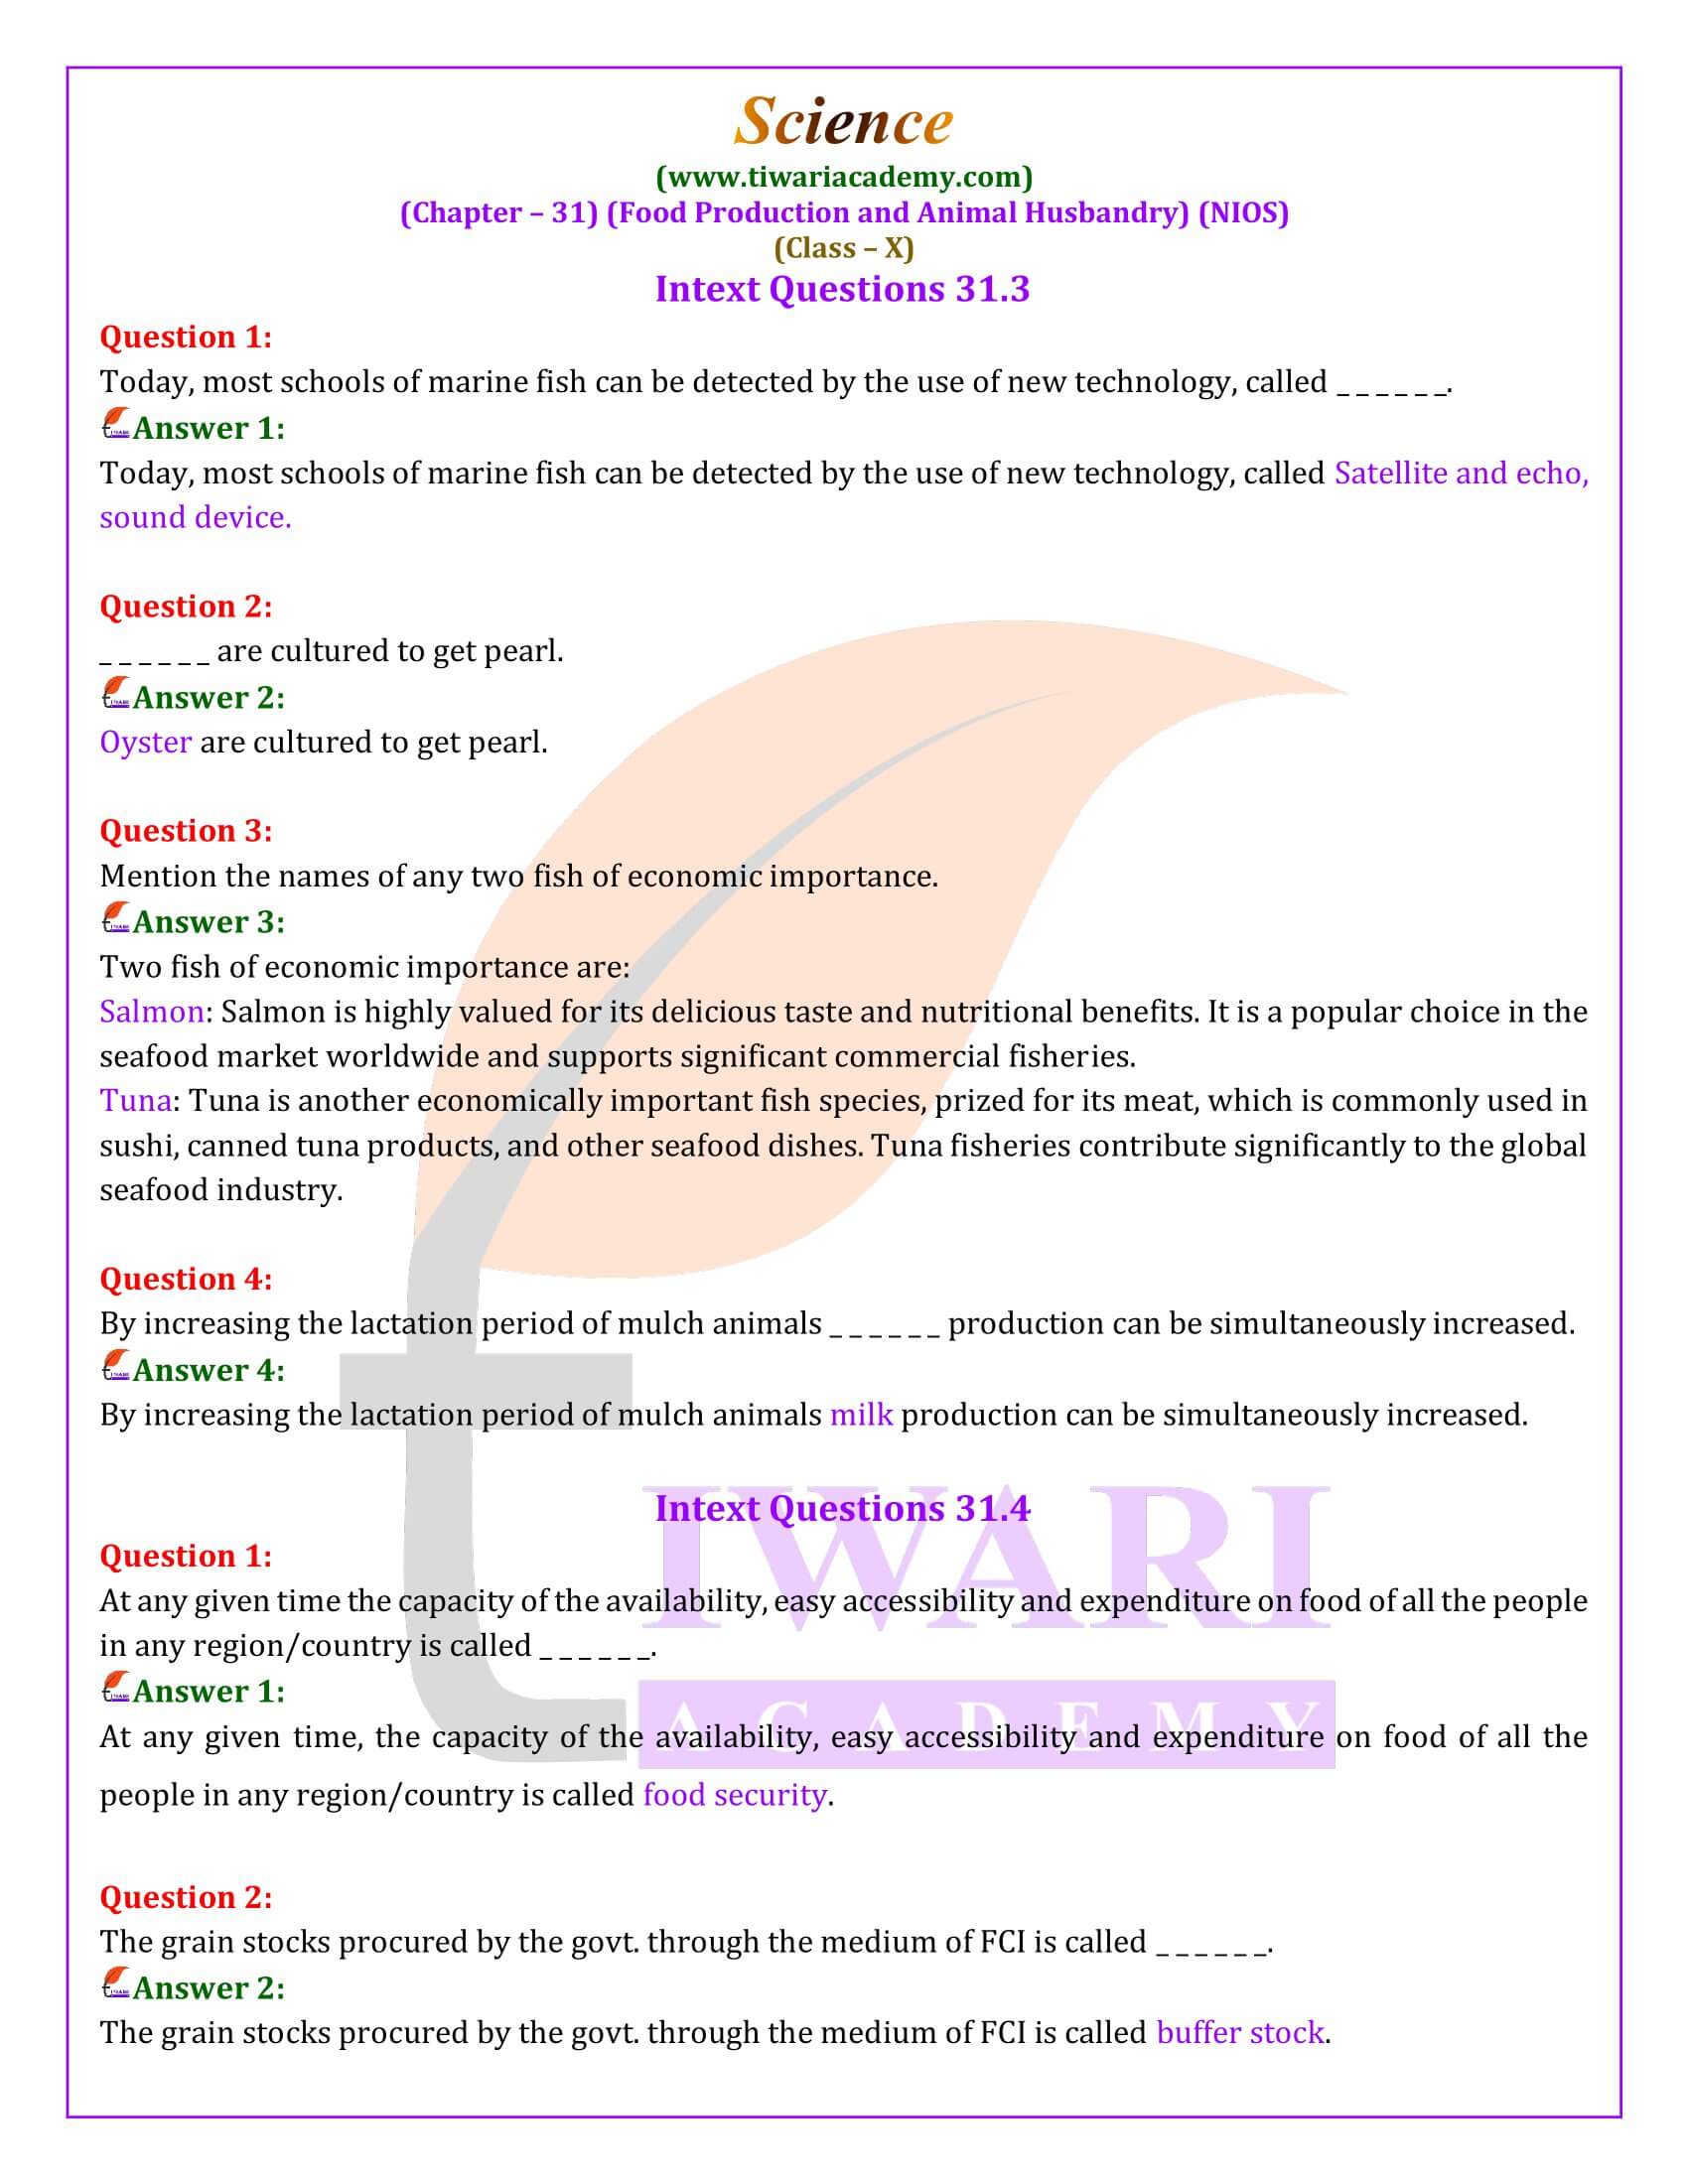 NIOS Class 10 Science Chapter 31 Food Production Answers